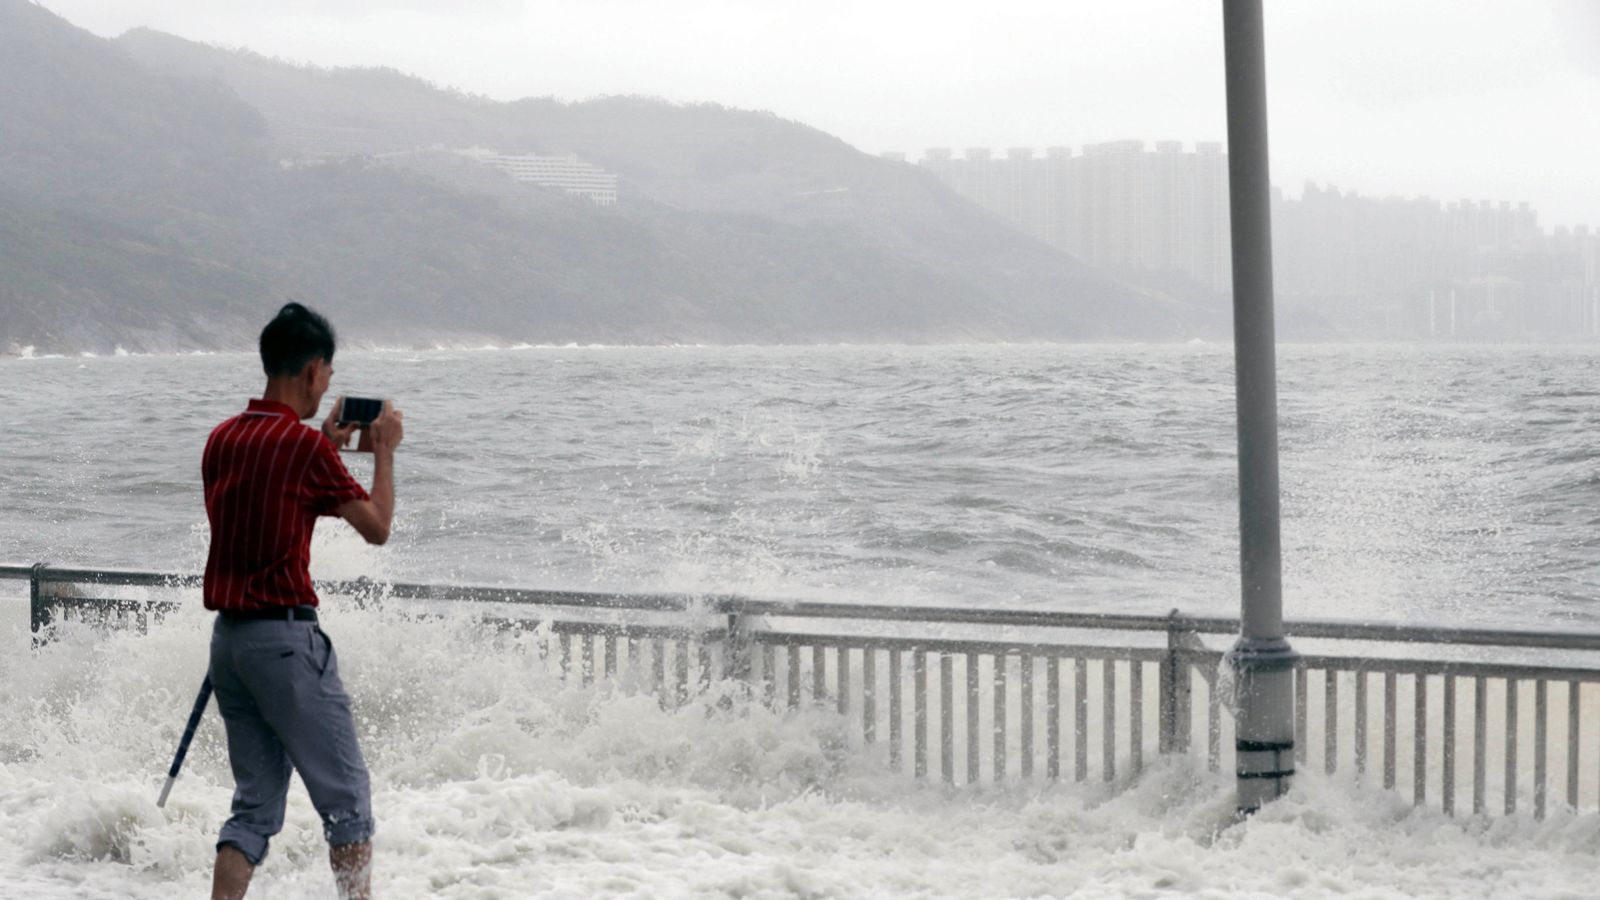 Typhoon Hato shuts down Hong Kong with gusts of up to 129mph | World ...